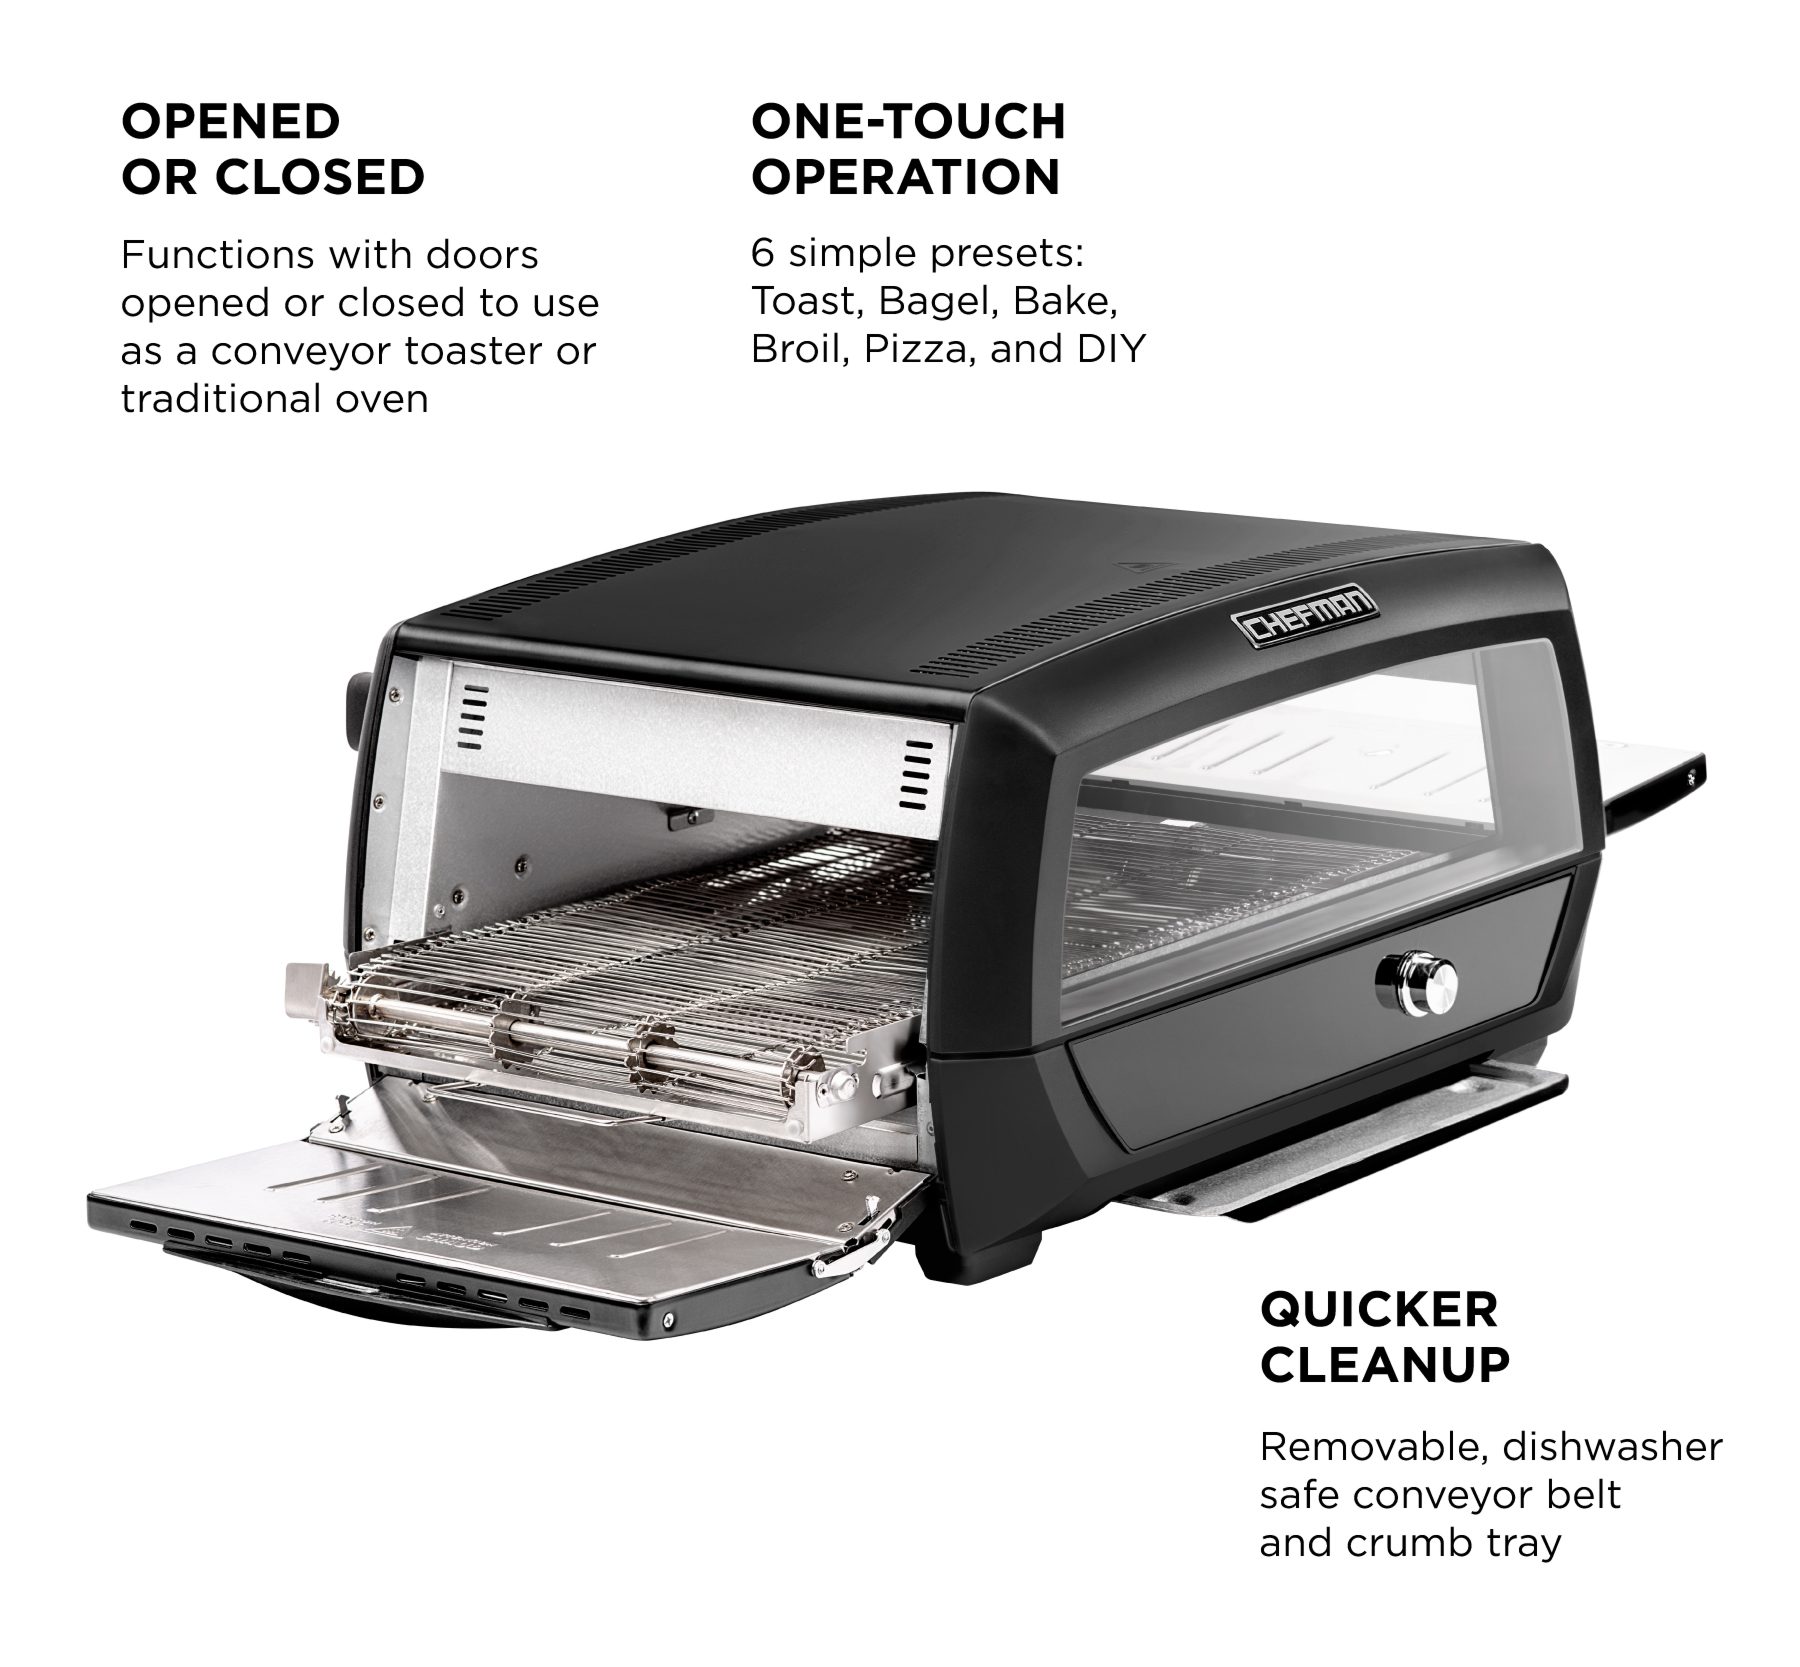 Chefman Food Mover Conveyor Toaster Oven, Stainless Steel - image 4 of 7